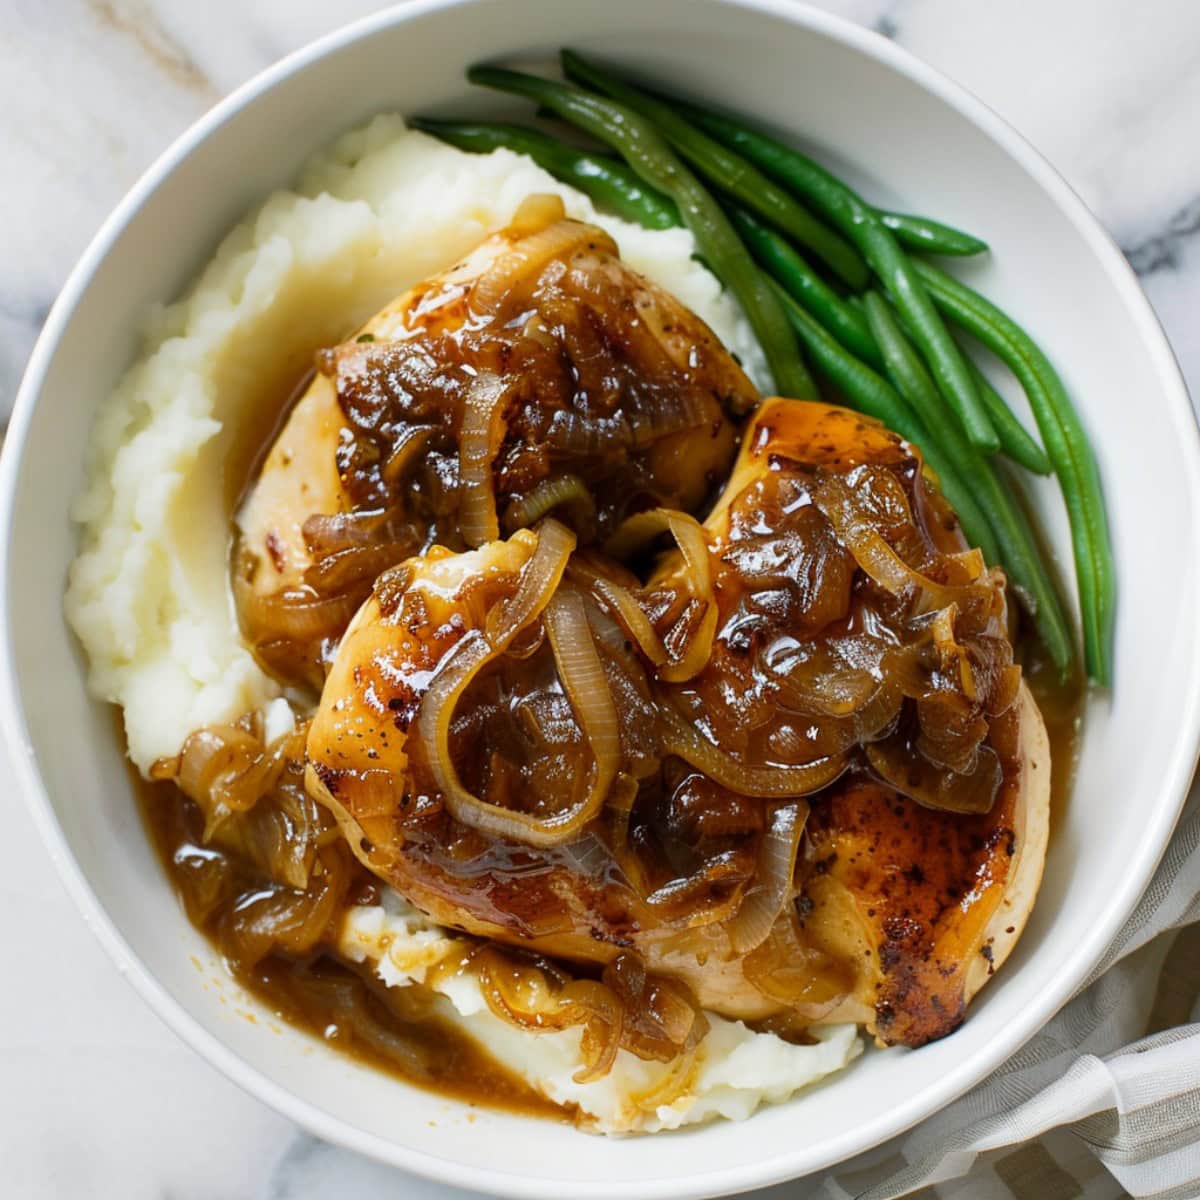 French onion chicken plated alongside a mashed potato and green beans